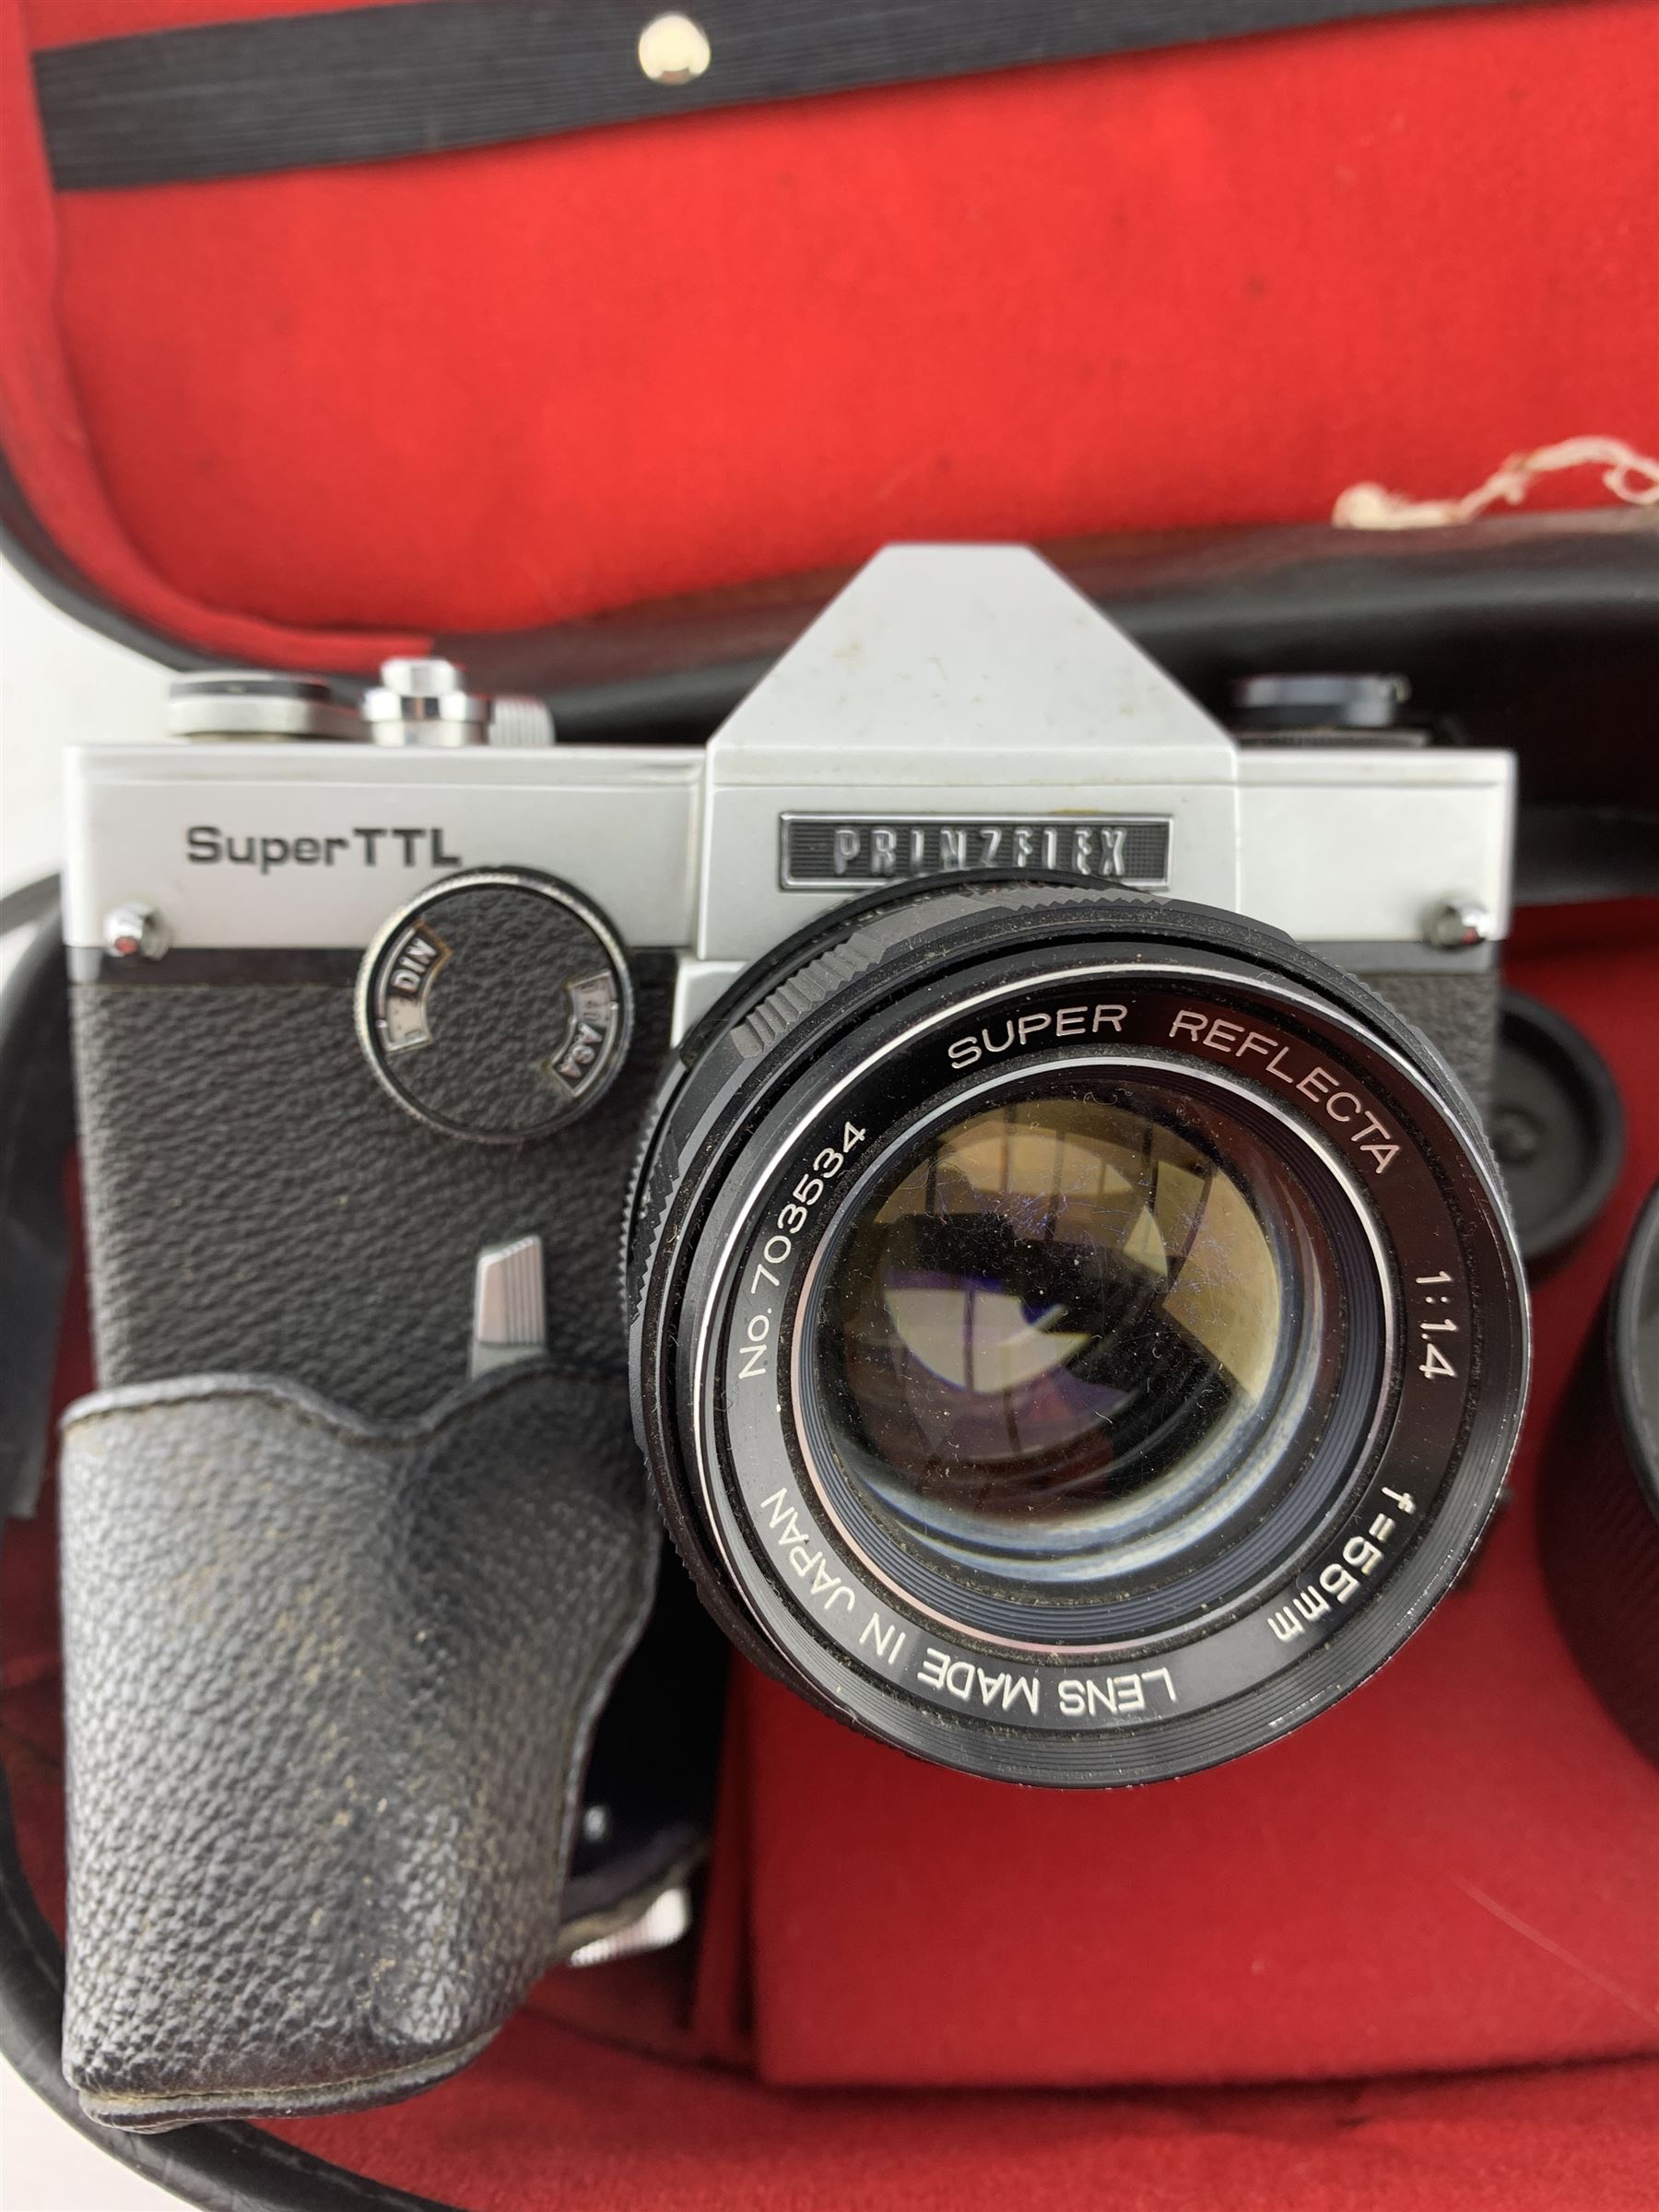 Prinzflex Super TTL camera with Super Reflecta lens in case and carrying bag - Image 2 of 2